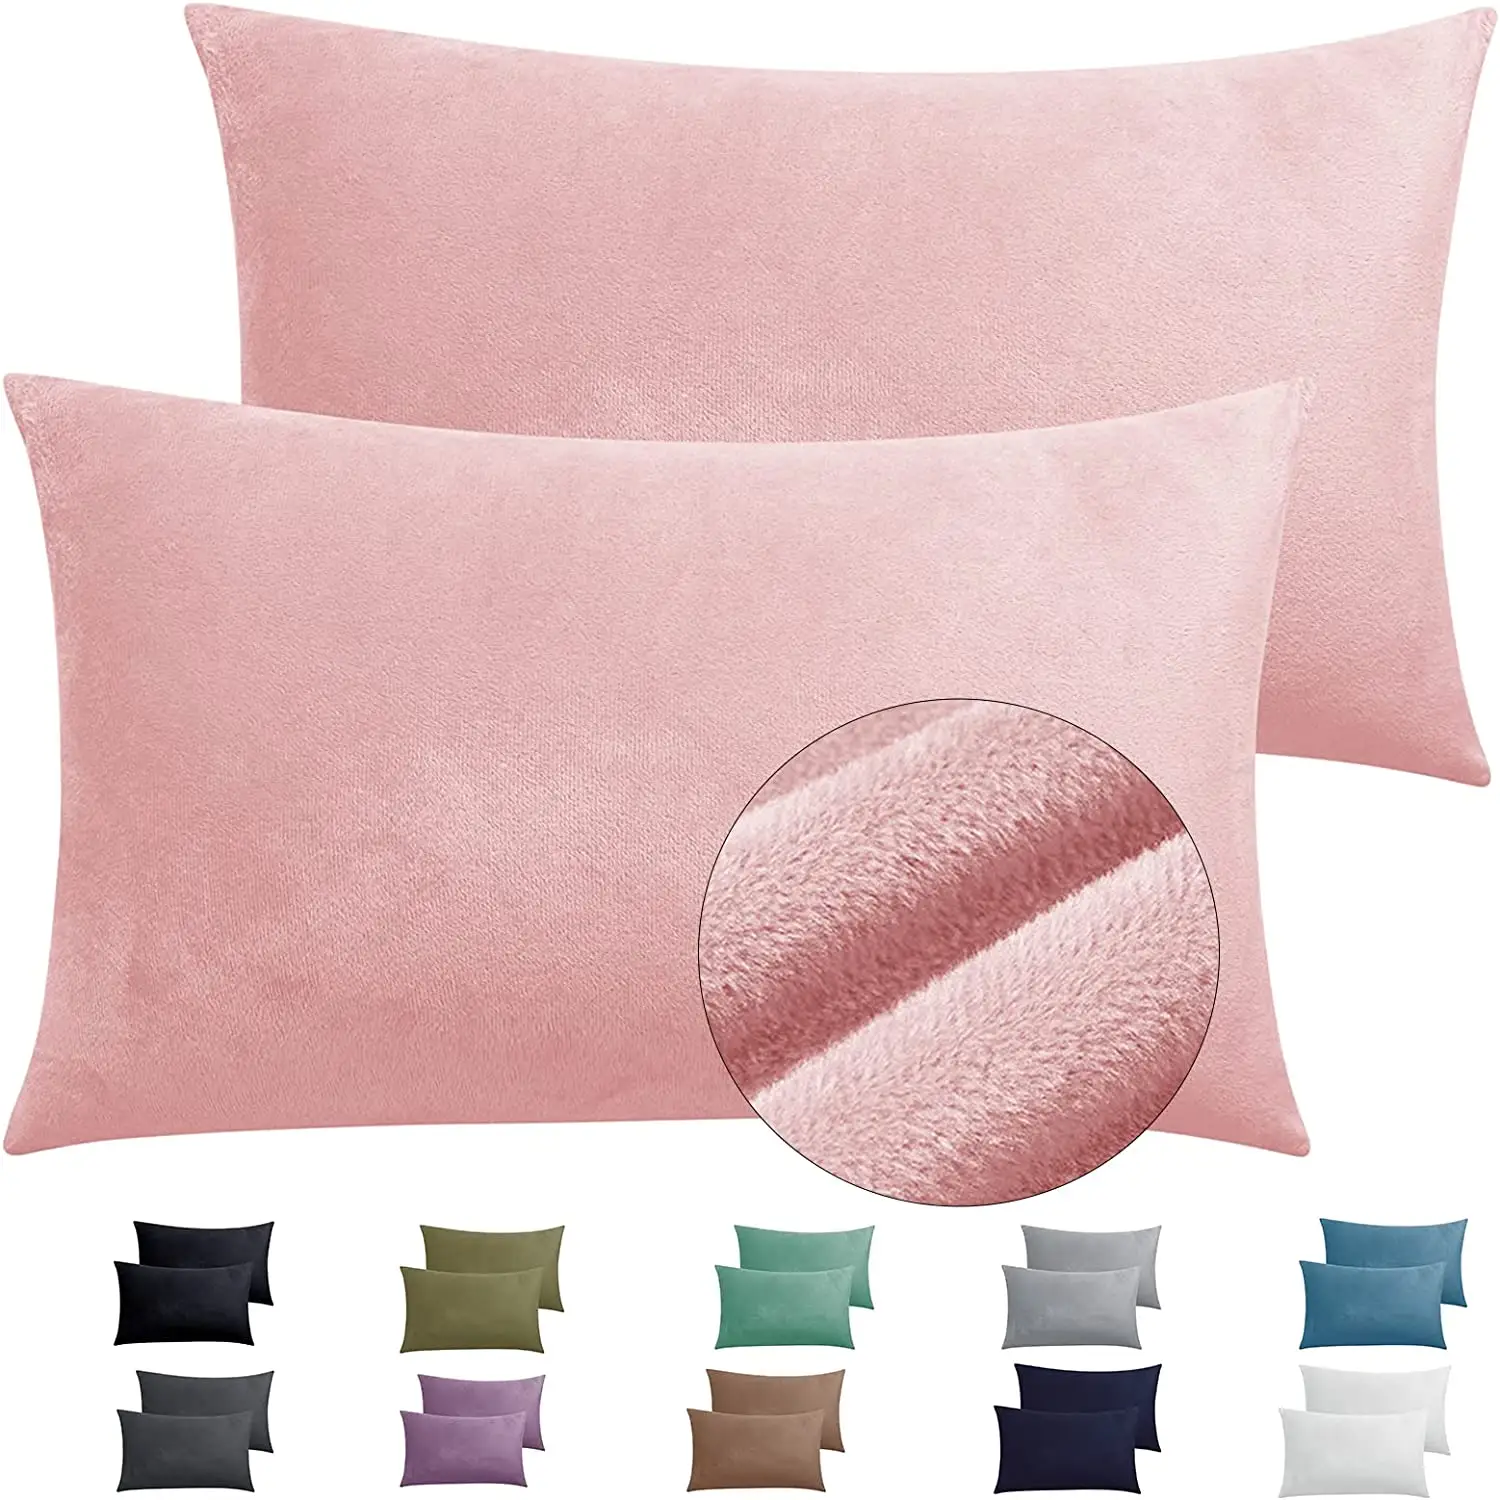 Soft Luxury Home Decoration Throw Pillow Case Velvet Pillow Cover for Couch Sofa/Bed Cushion Covers